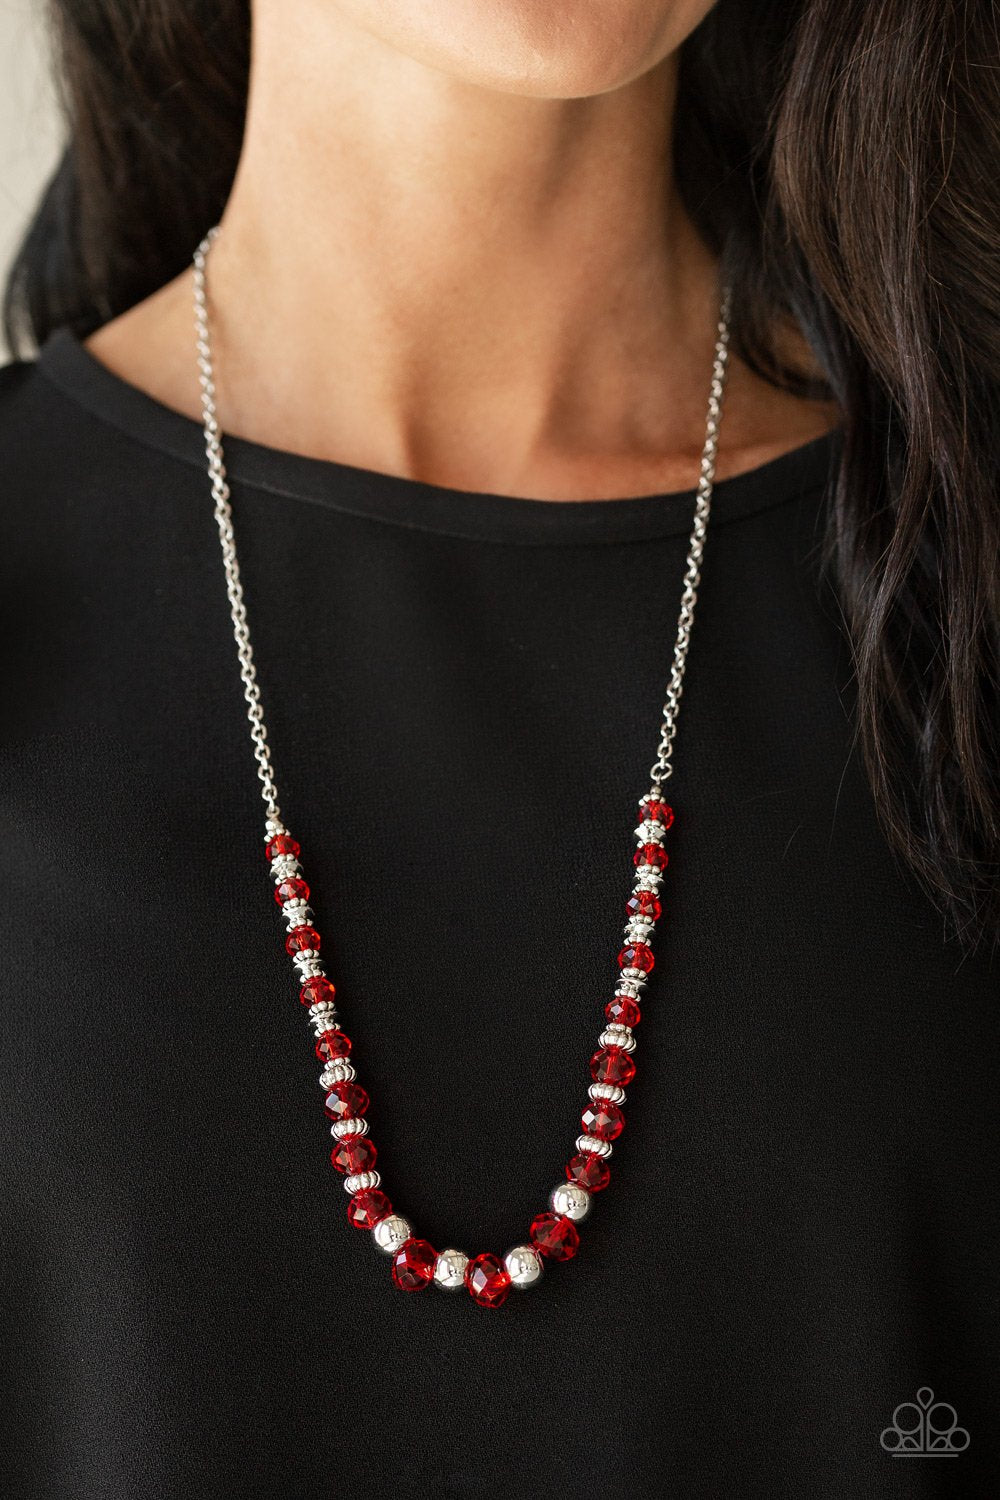 Stratosphere Sparkle - red - Paparazzi necklace